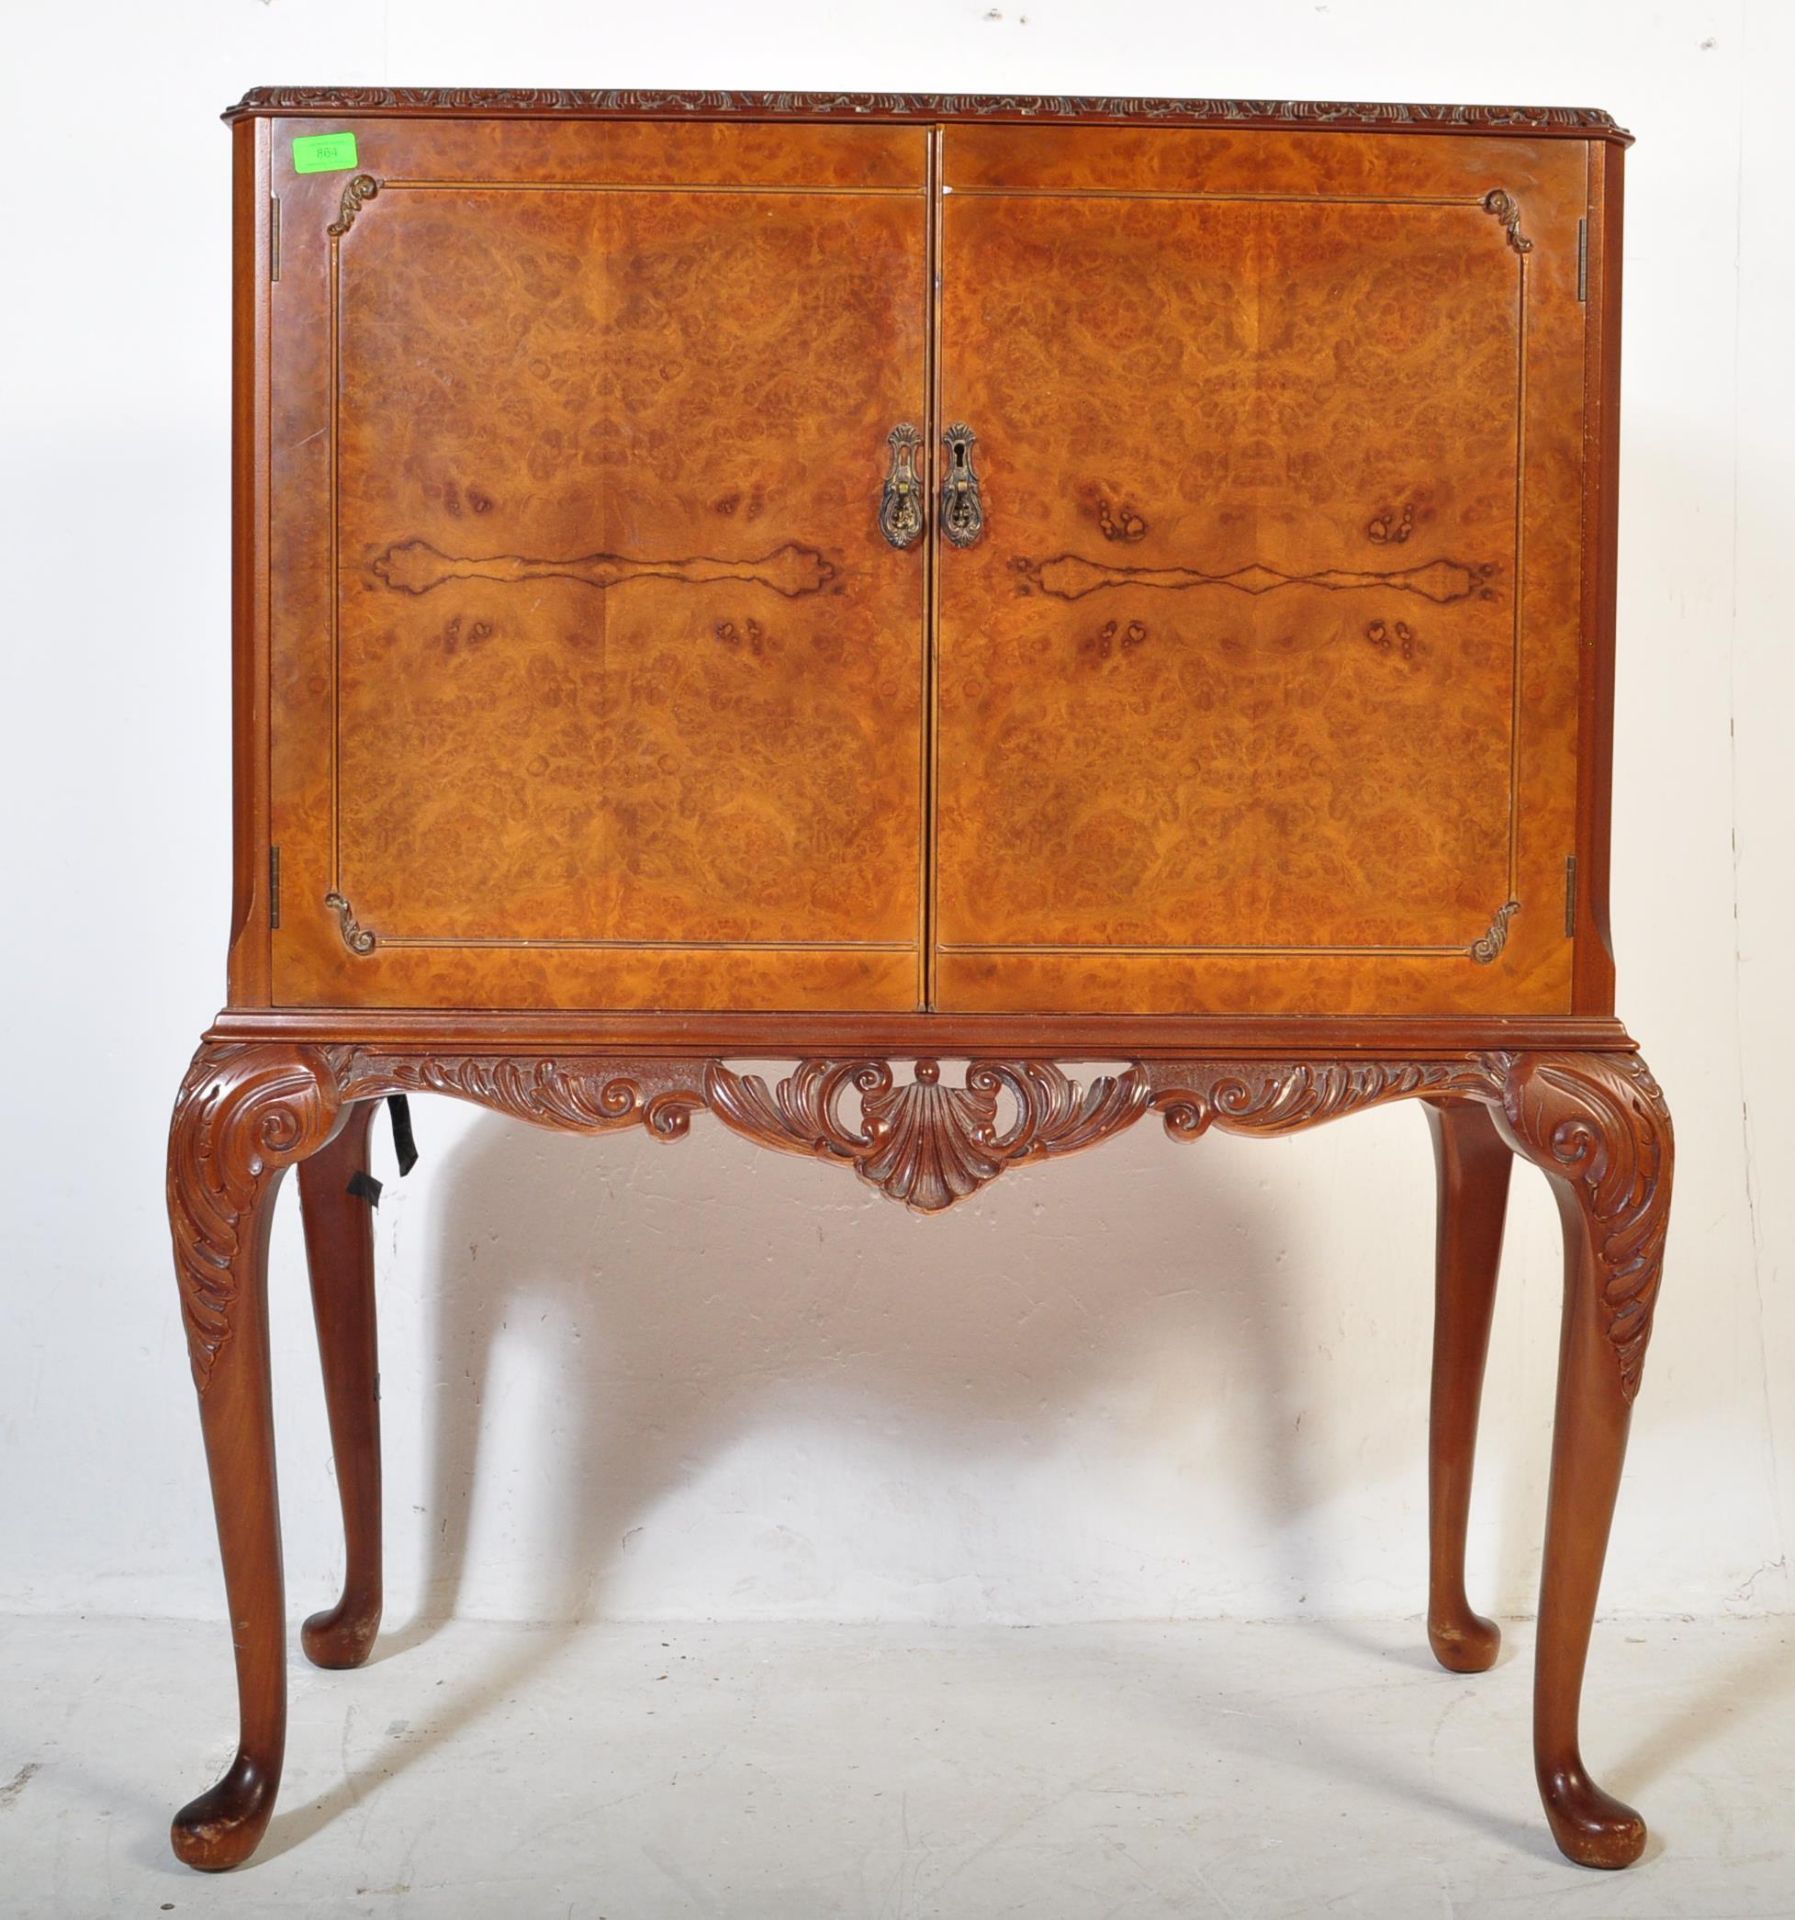 20TH CENTURY QUEEN ANNE REVIVAL WALNUT COCKTAIL CABINET - Image 3 of 7